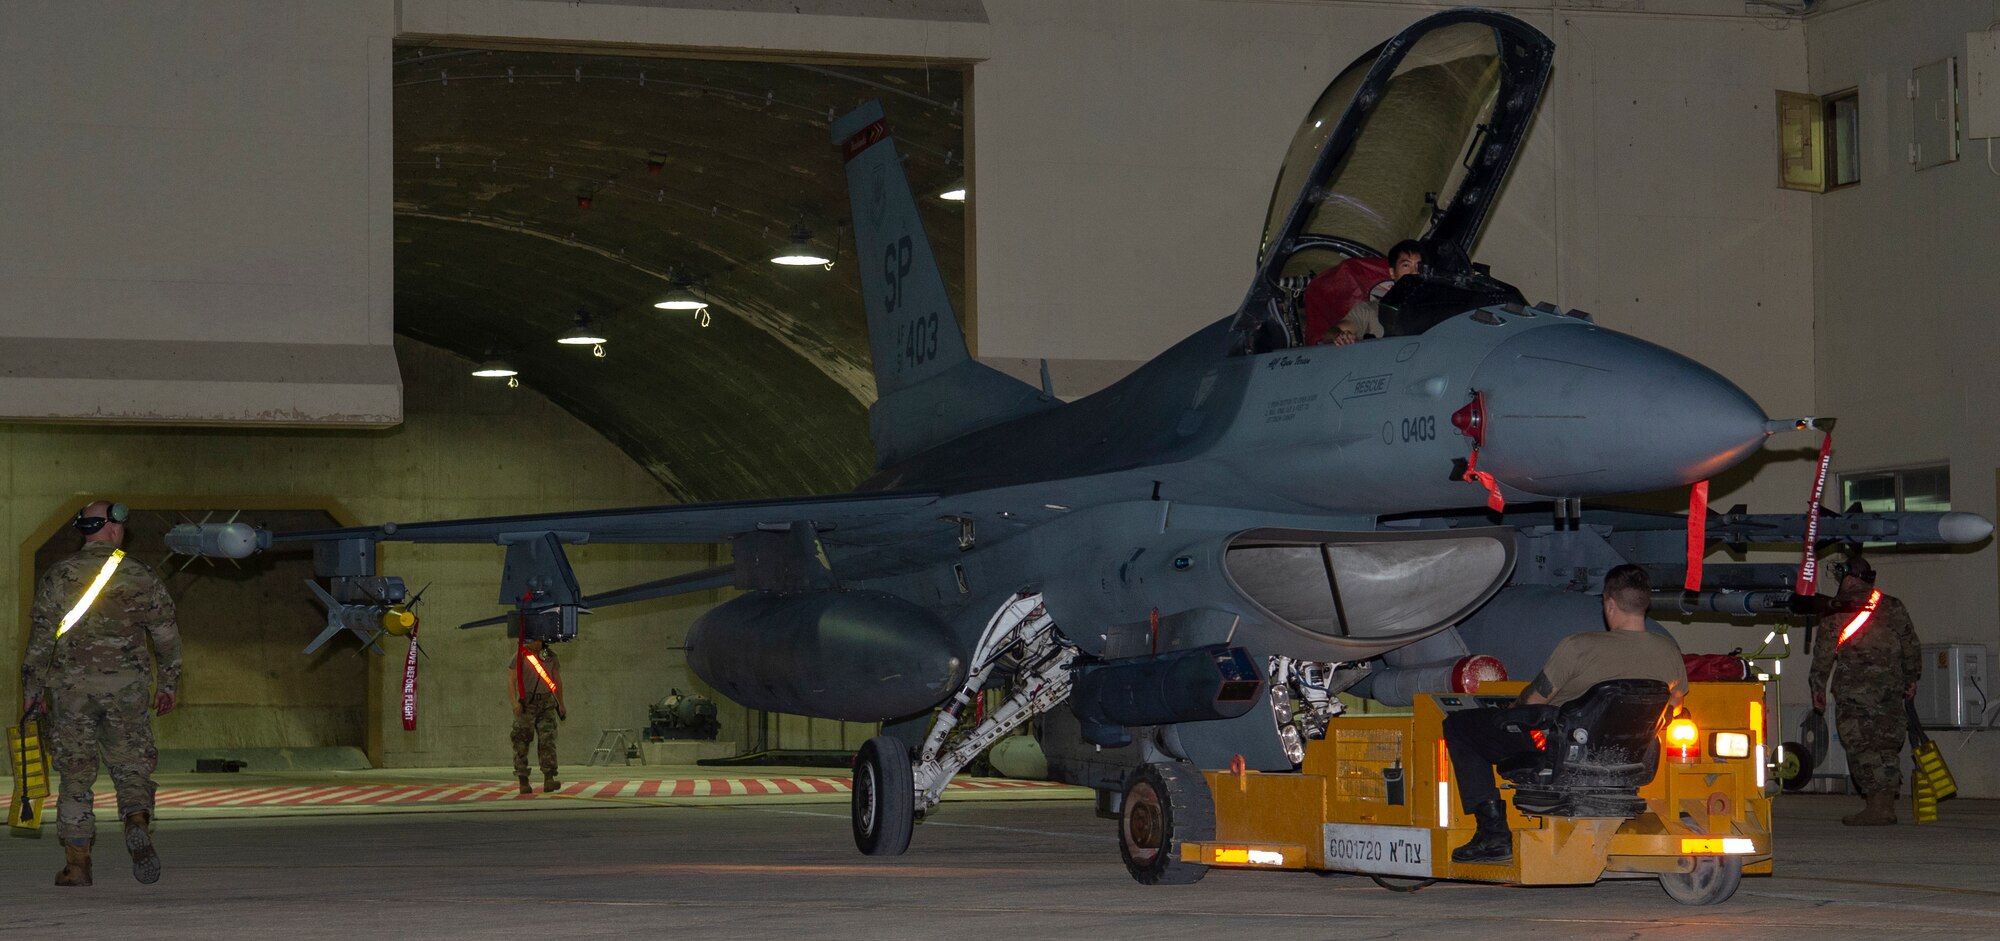 U.S. Air Force Airmen from the 52nd Aircraft Maintenance Squadron, park an F-16 Fighting Falcon inside a protective aircraft shelter during Blue Flag 2019 at Uvda Air Base, Israel, November 6, 2019.